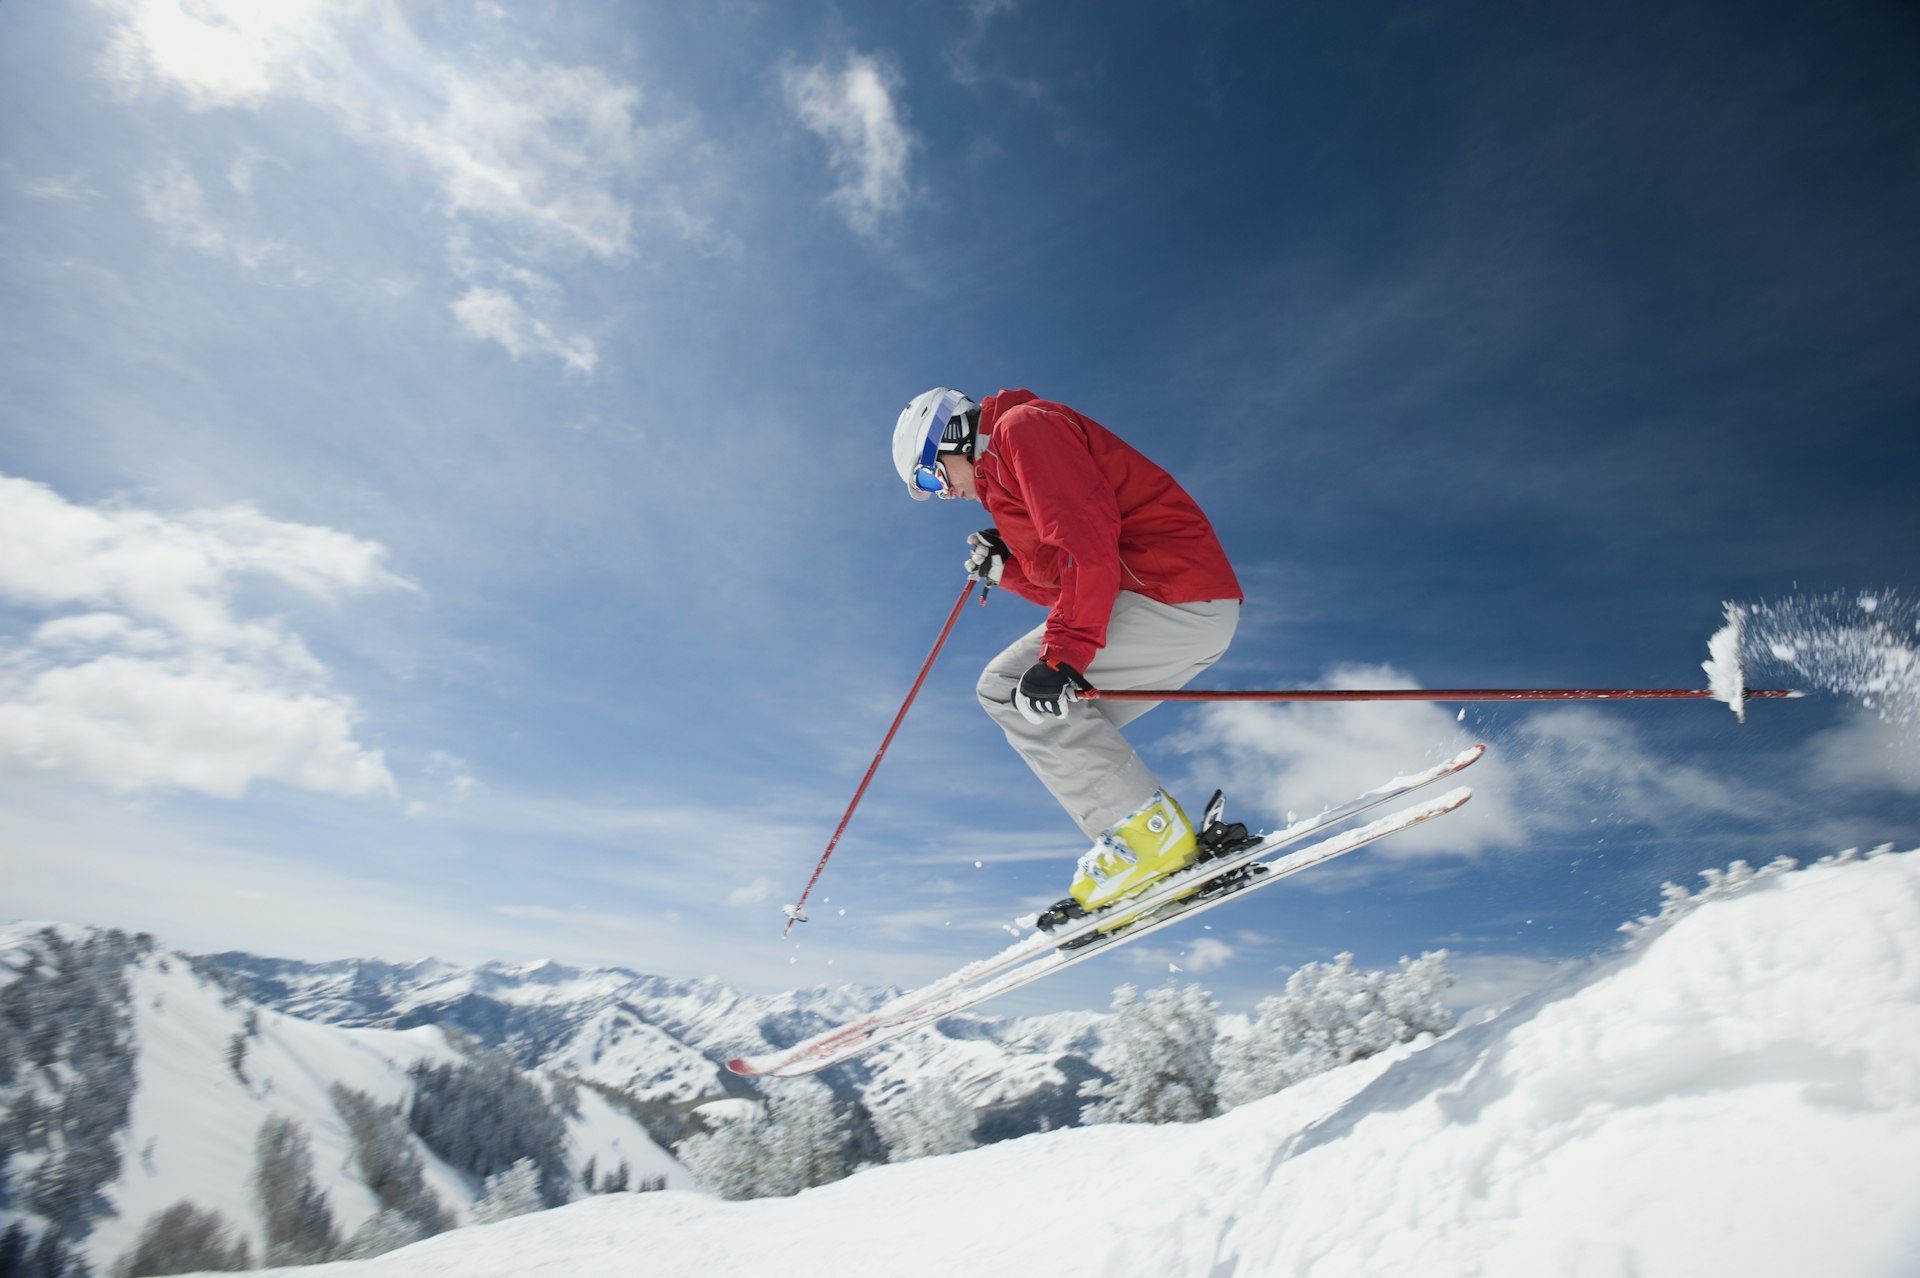 A man in a bright red jacket and goggles, getting air as he skis downhill